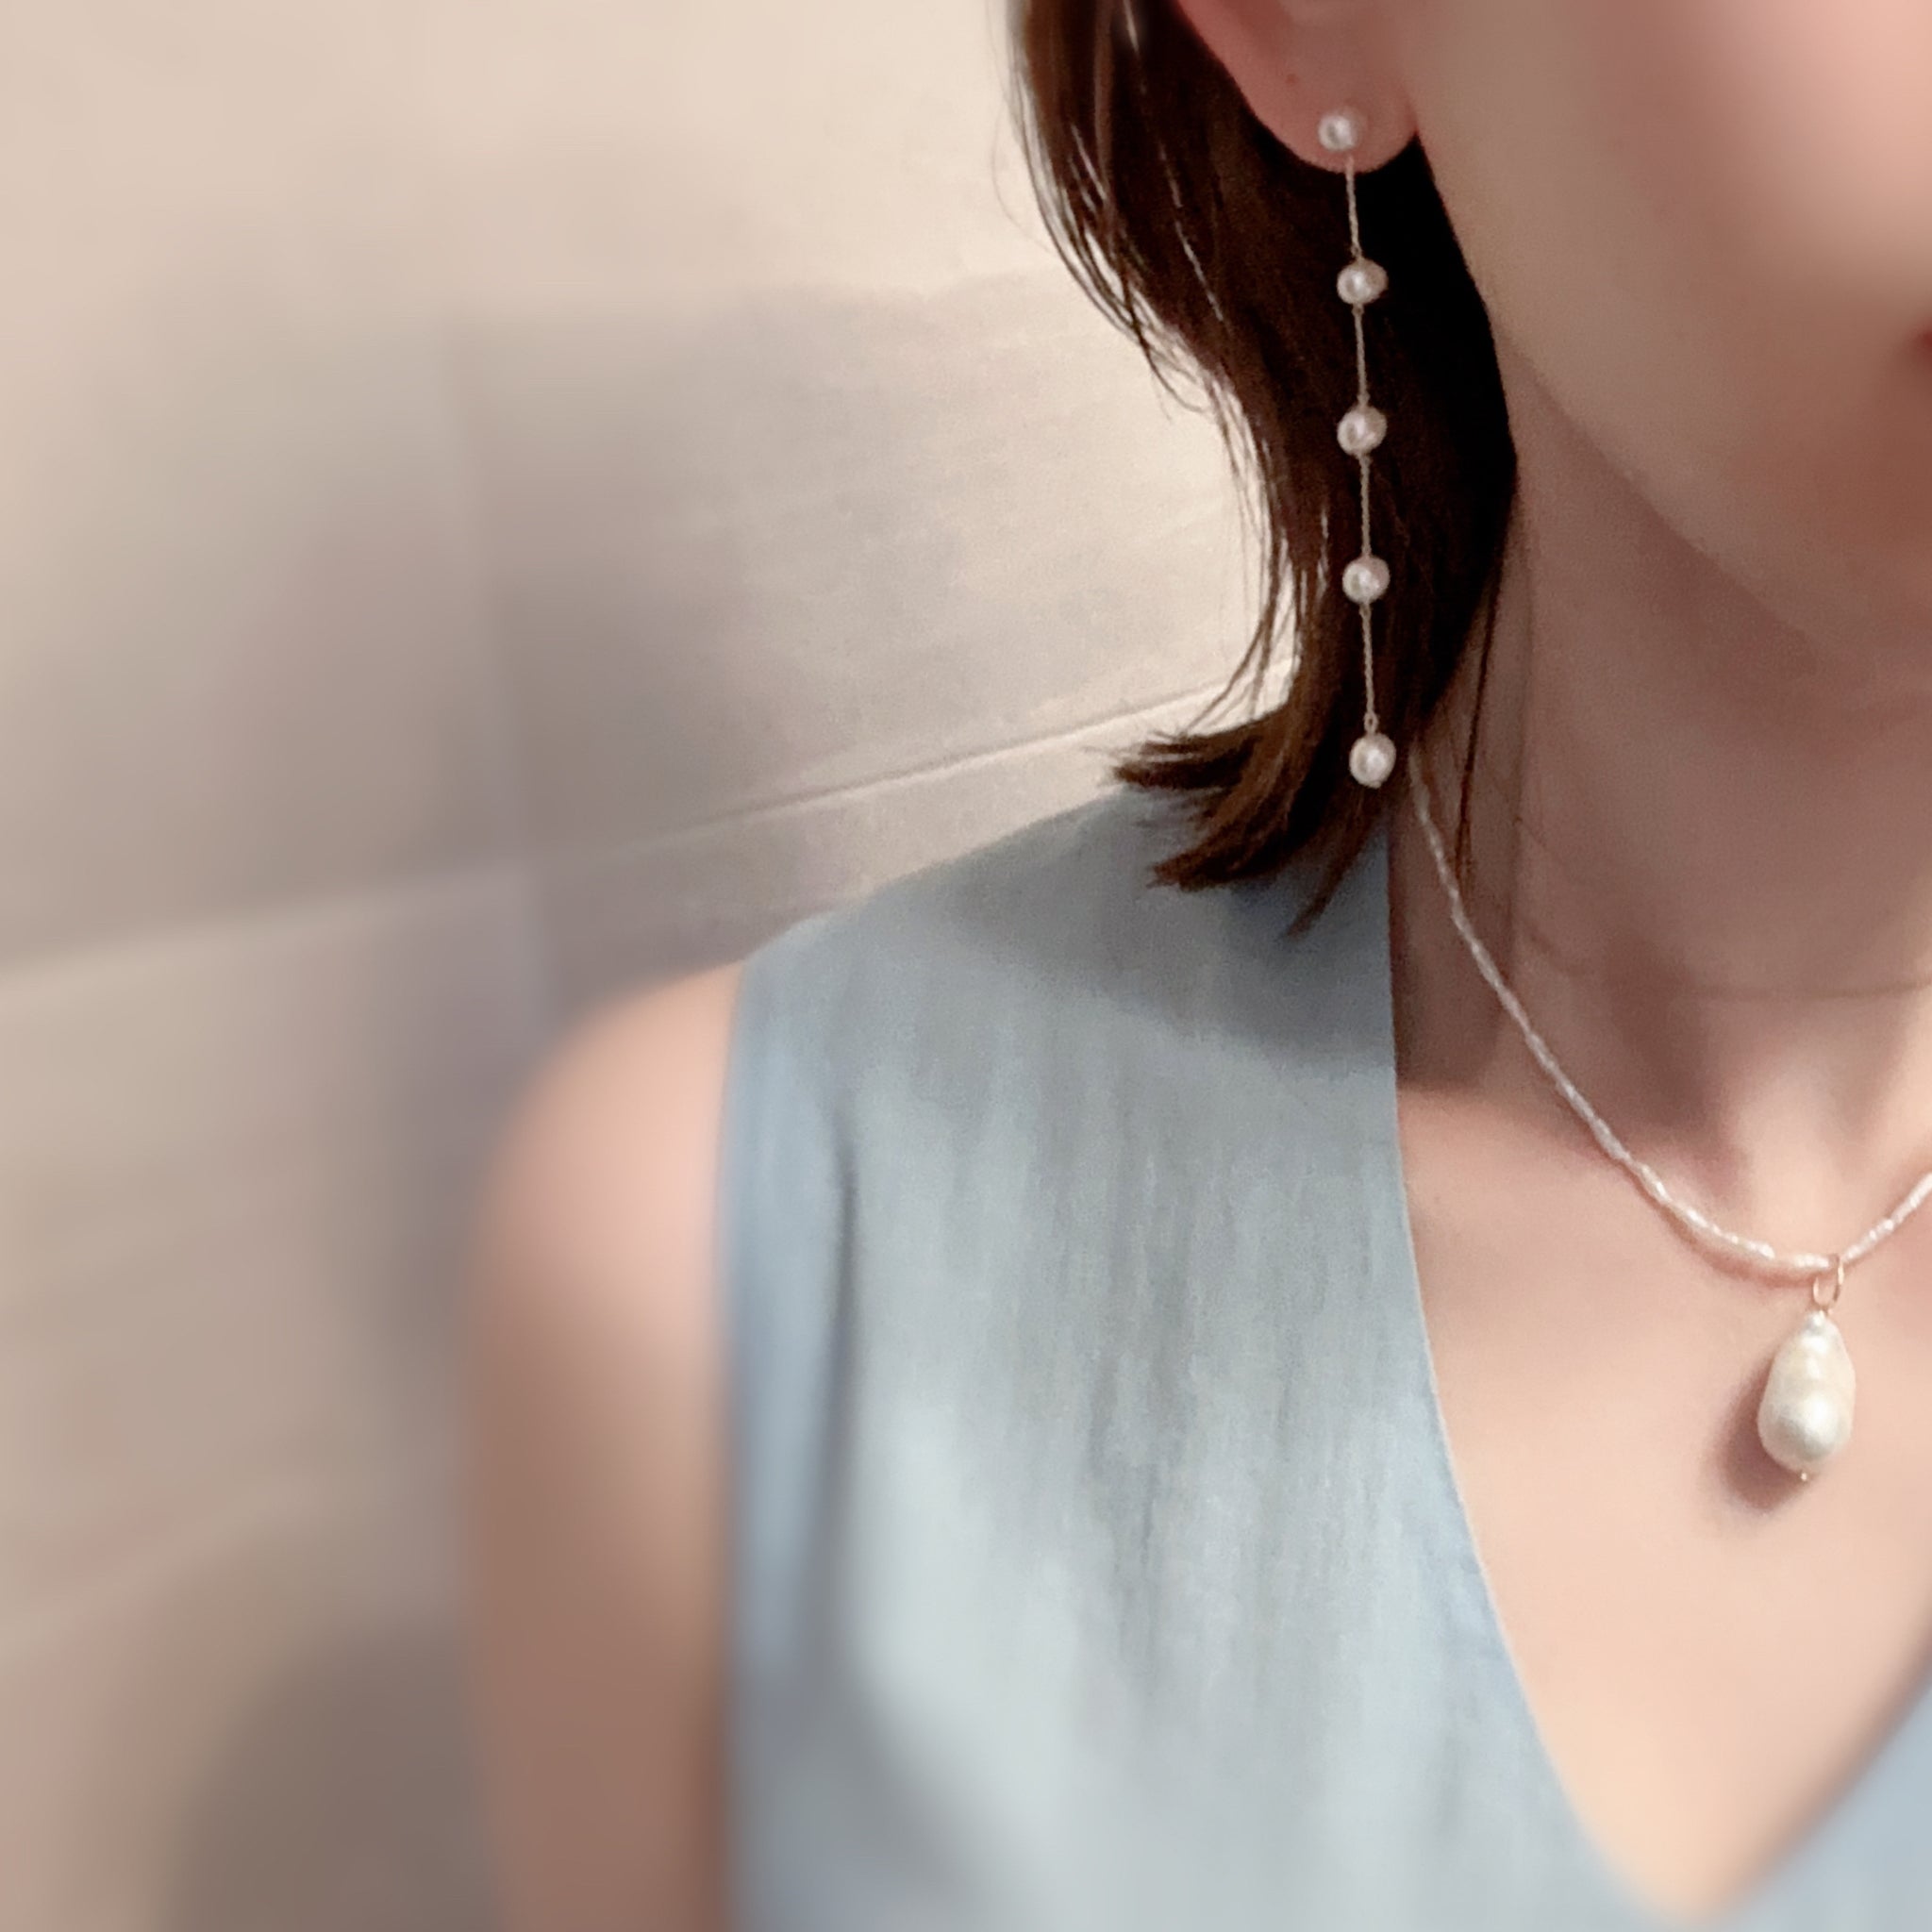 keshi pearl oyster baroque necklace ネックレス